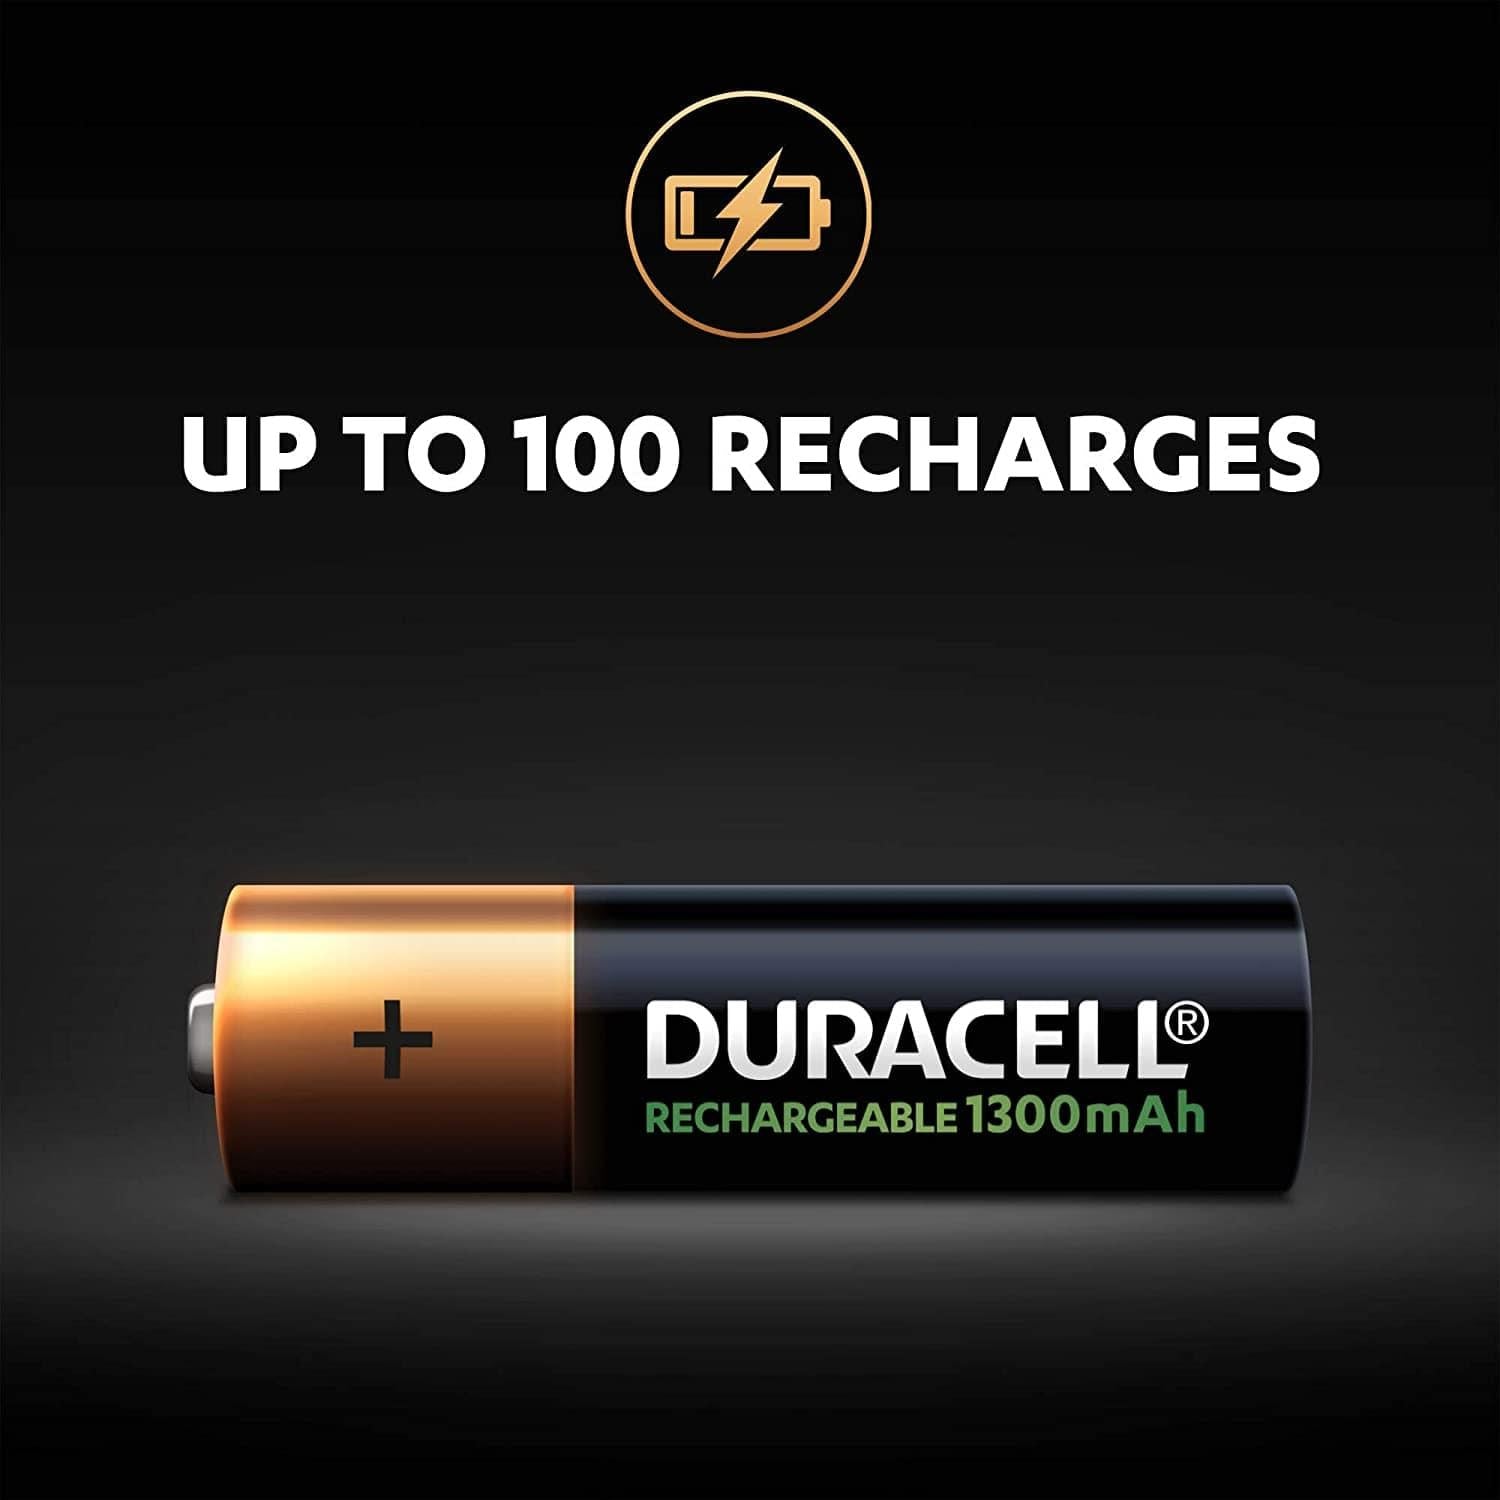 Duracell Rechargeable AAA 750mAh Batteries, Pack of 2-Battery-dealsplant